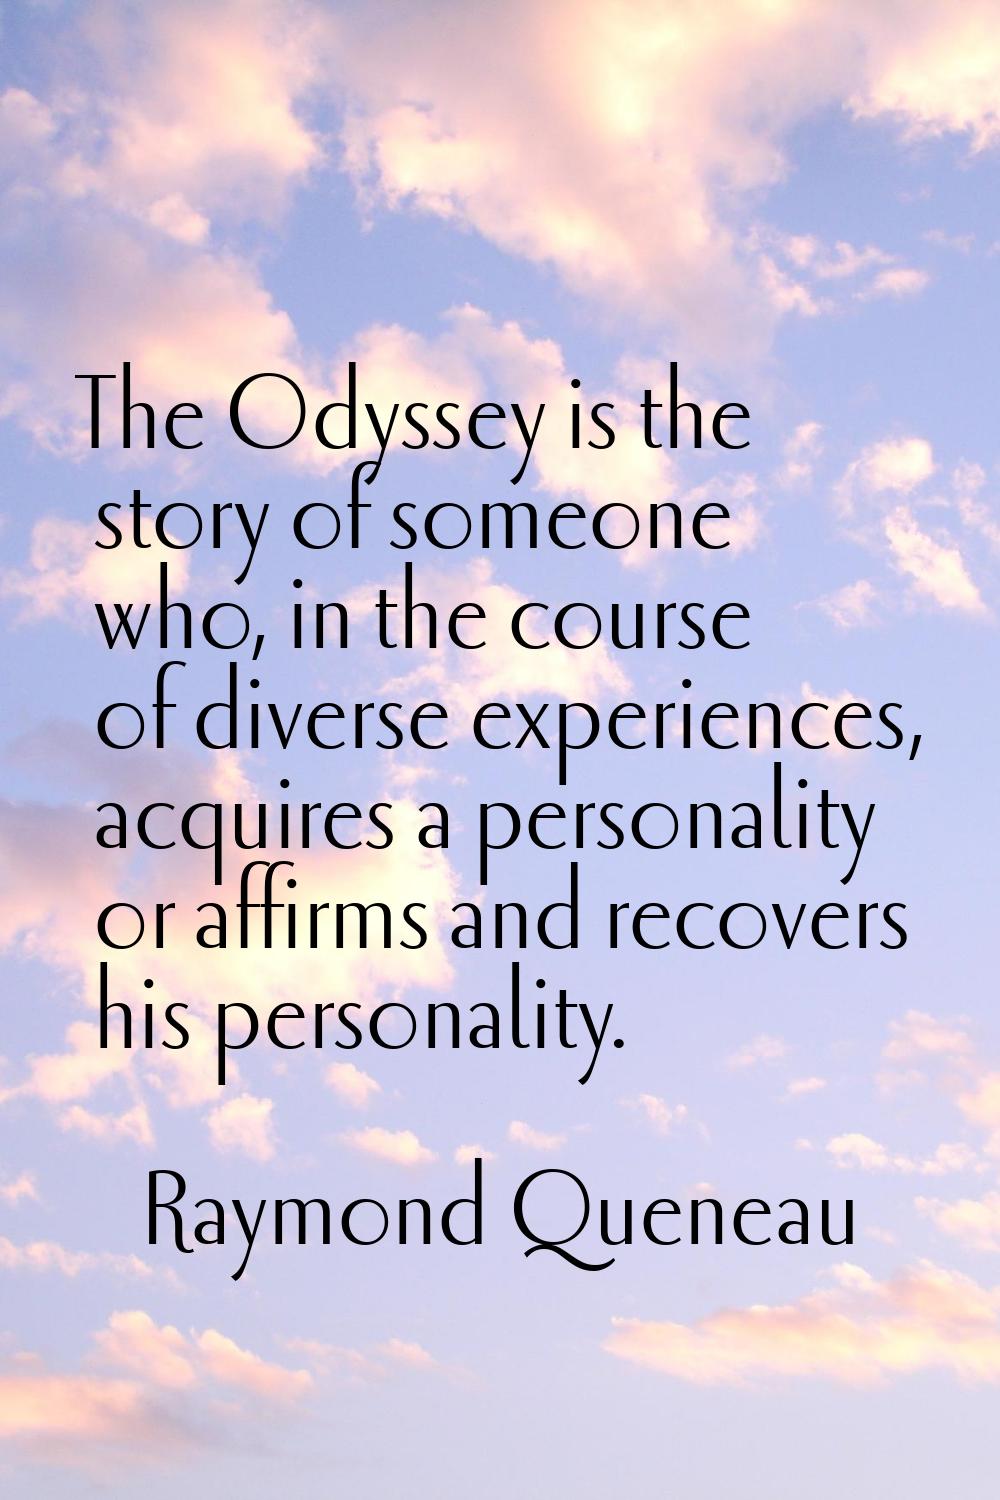 The Odyssey is the story of someone who, in the course of diverse experiences, acquires a personali